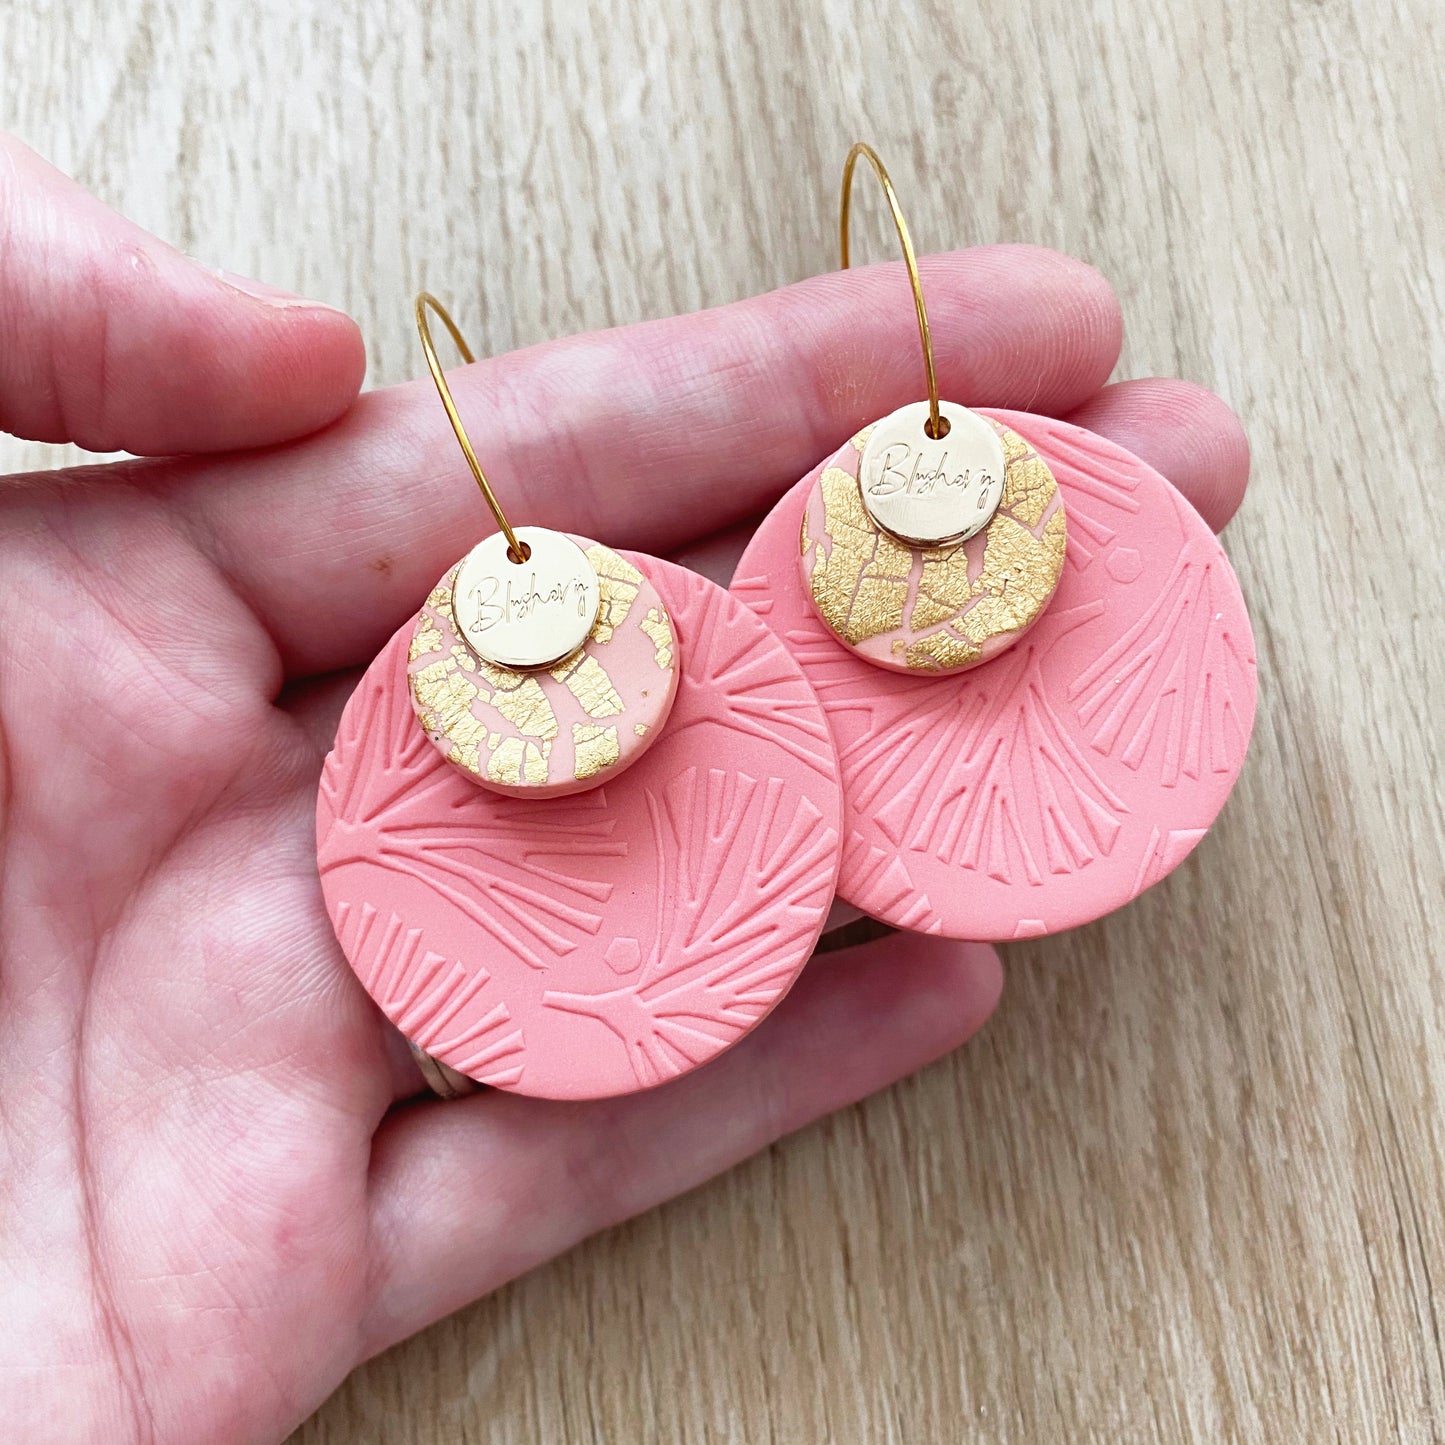 round disc earrings in coral pink and gold, hoops are stainless steel